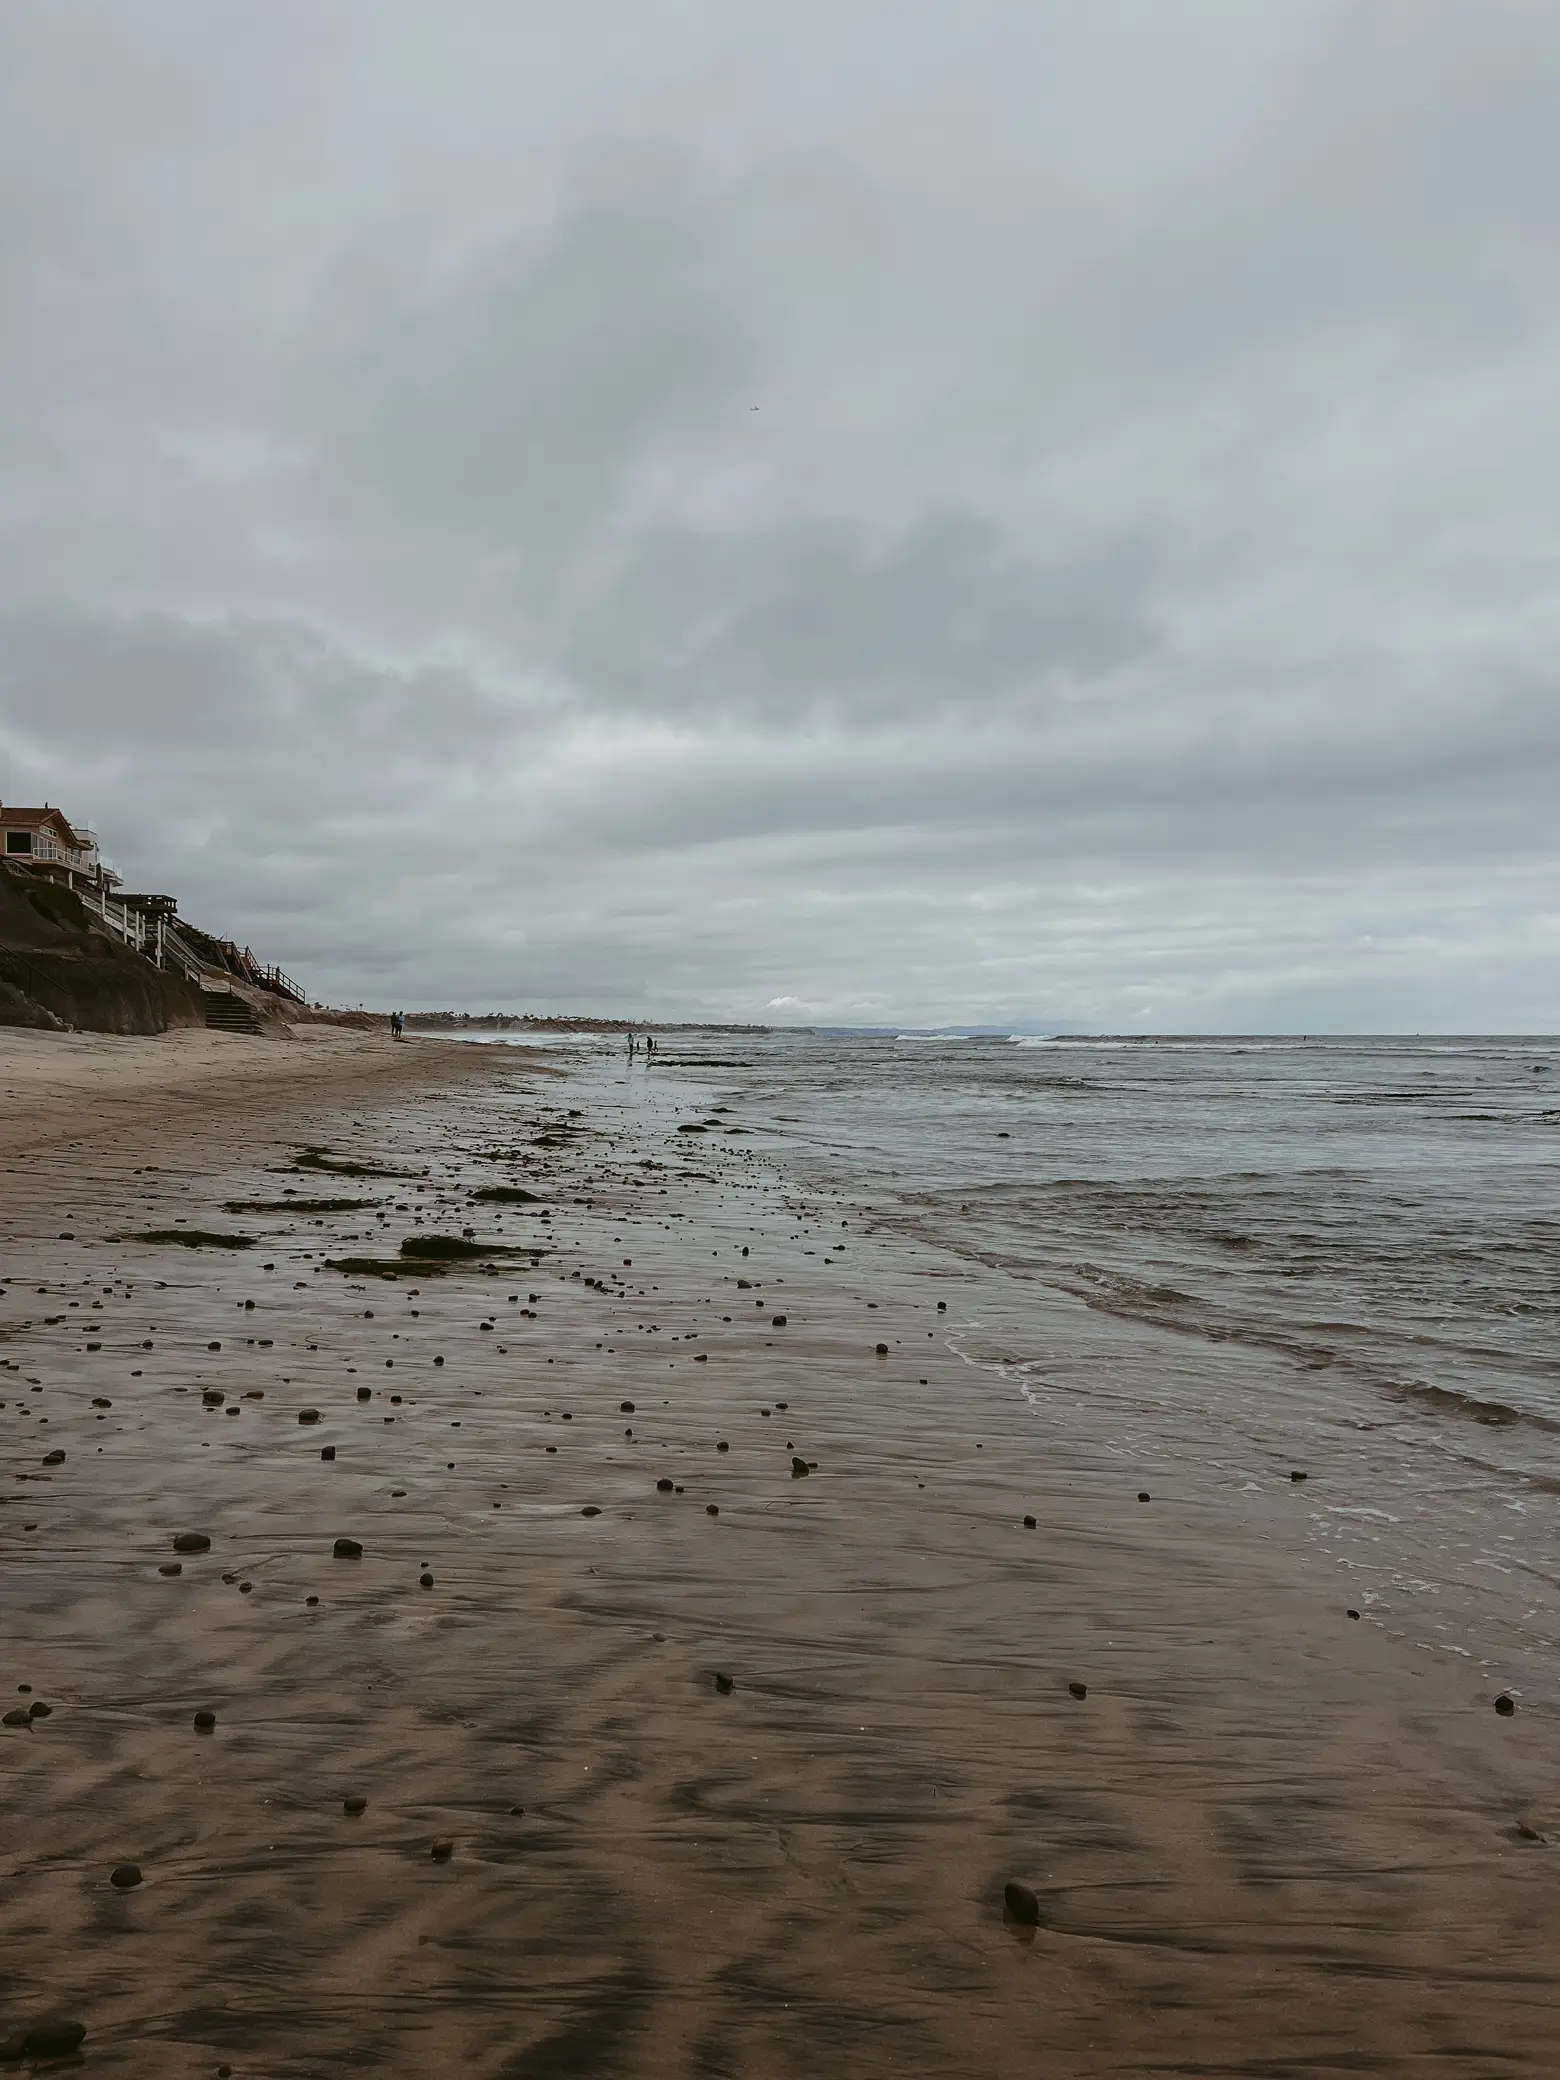  A beach scene with a house in the background and a cloudy sky.